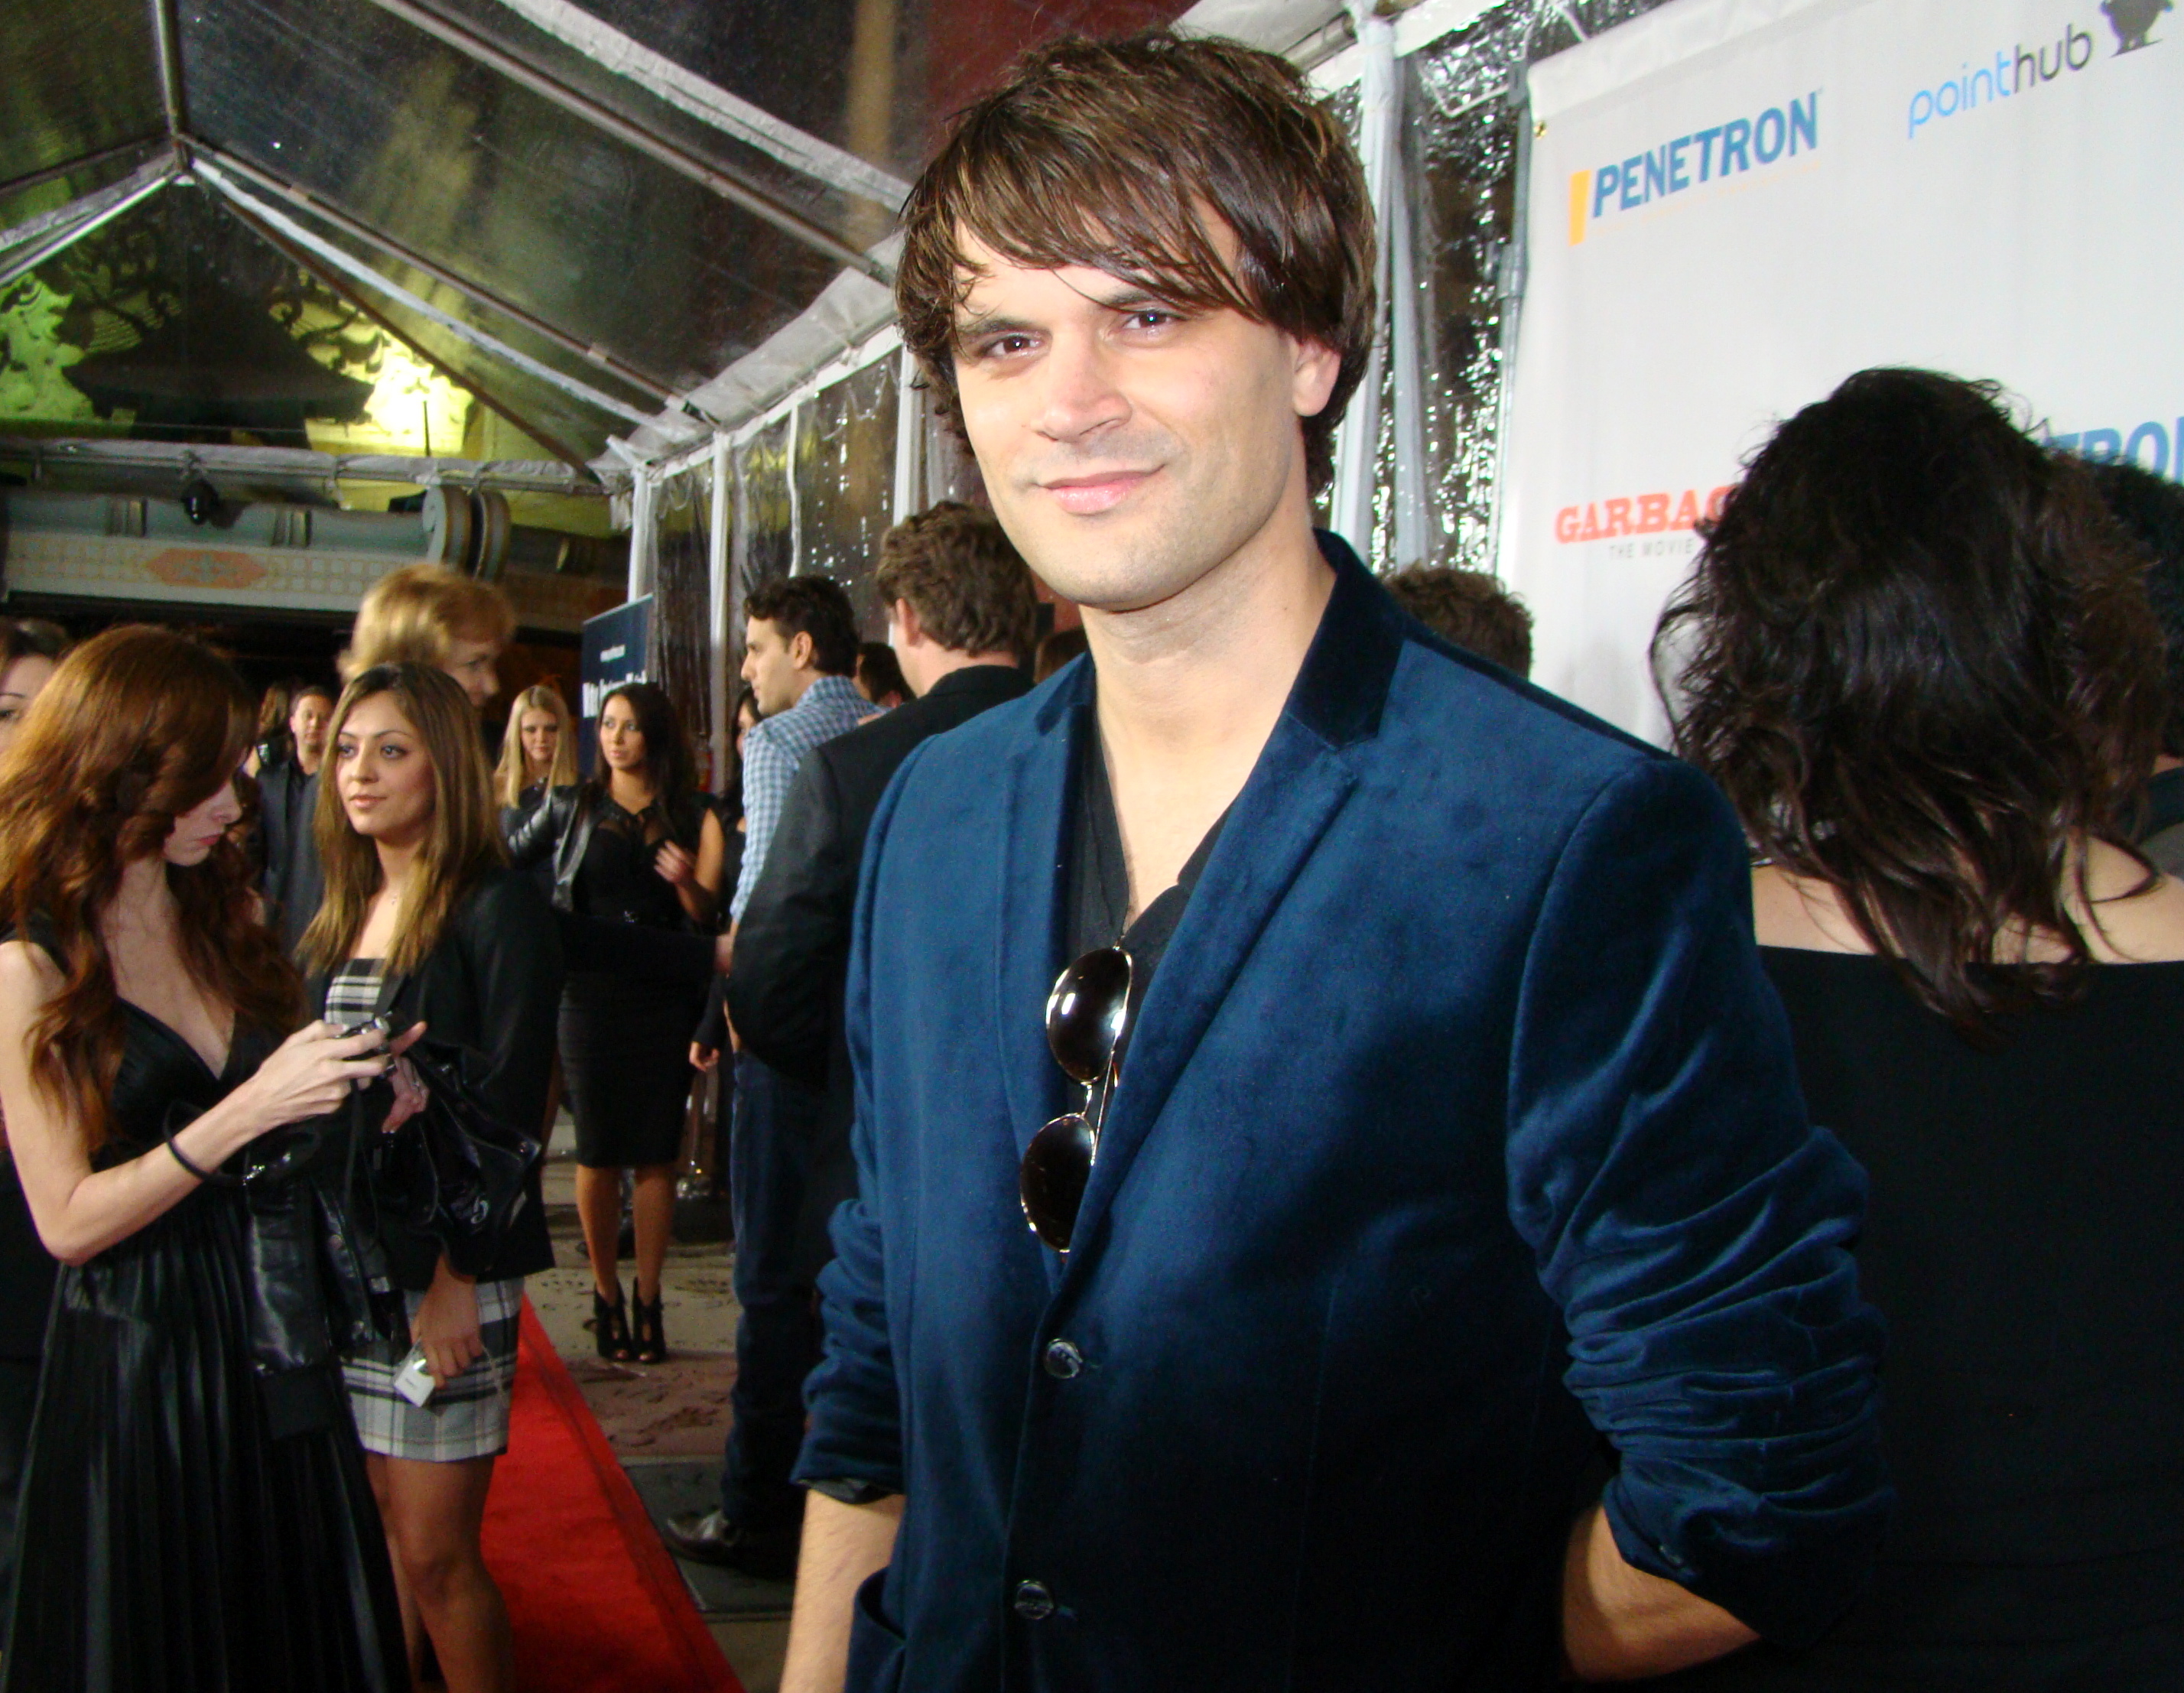 Kash Hovey at the event of Garbage Premiere at the Chinese Theater.